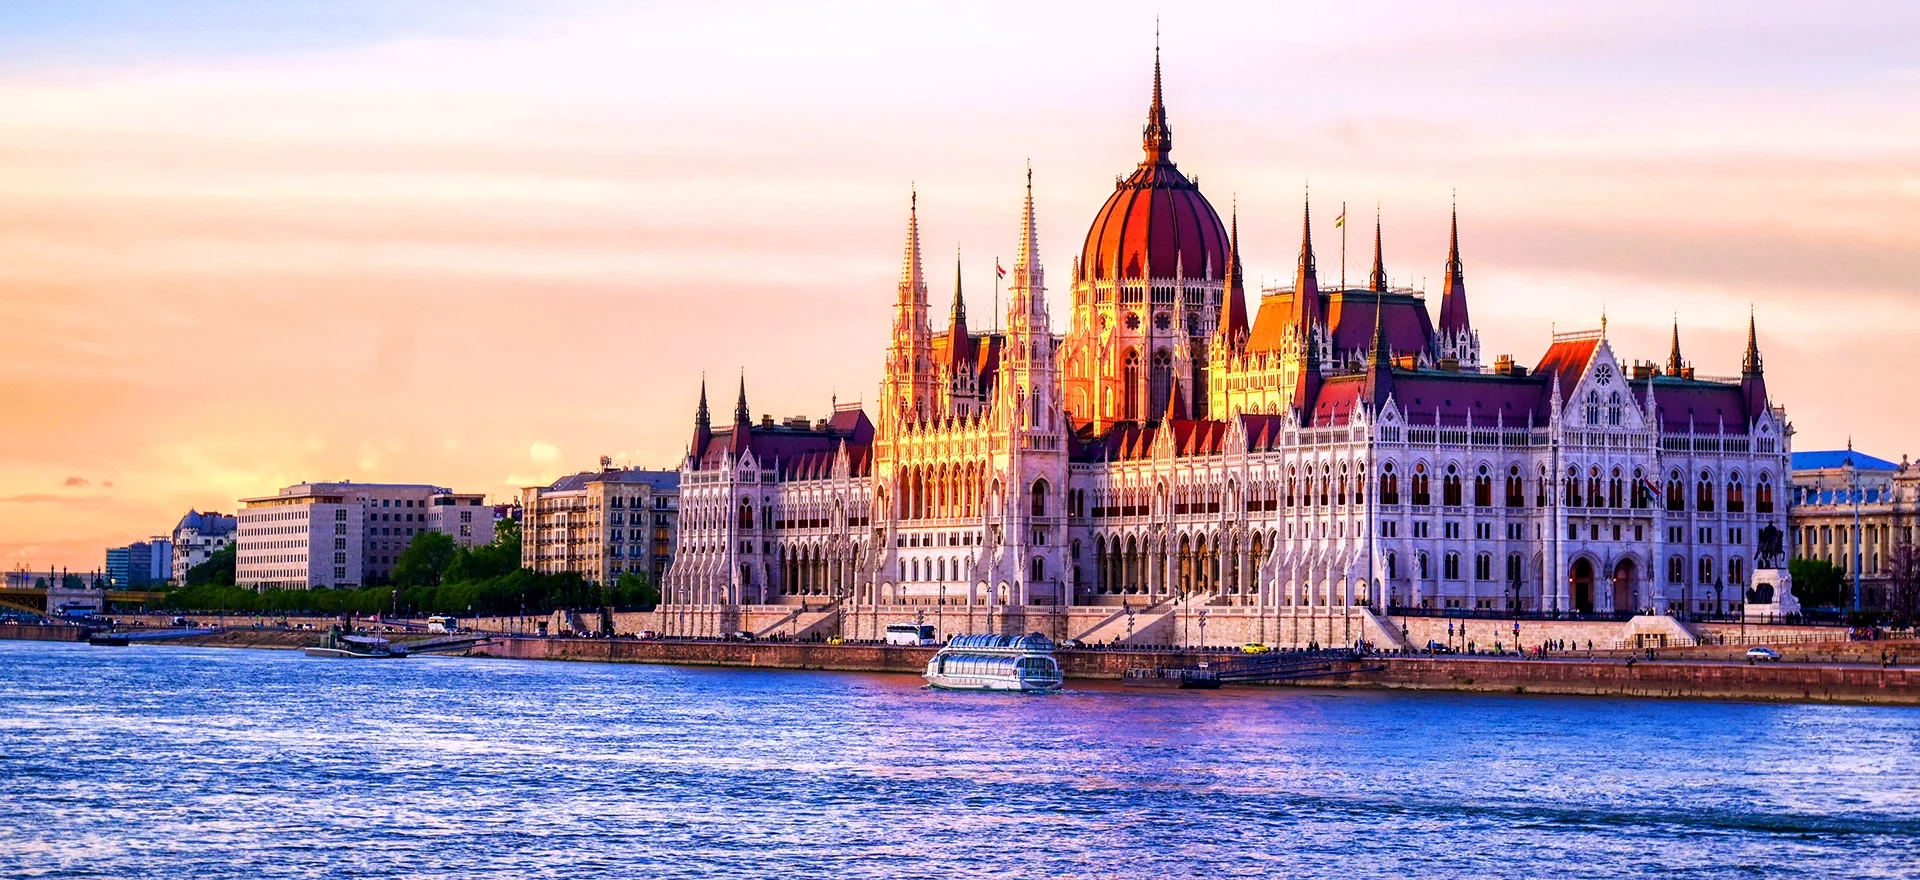 USE_The-Hungarian-Parliament-Building-located-on-the-Danube-River-in-Budapest_Credit_Alamy_2AGHJXK